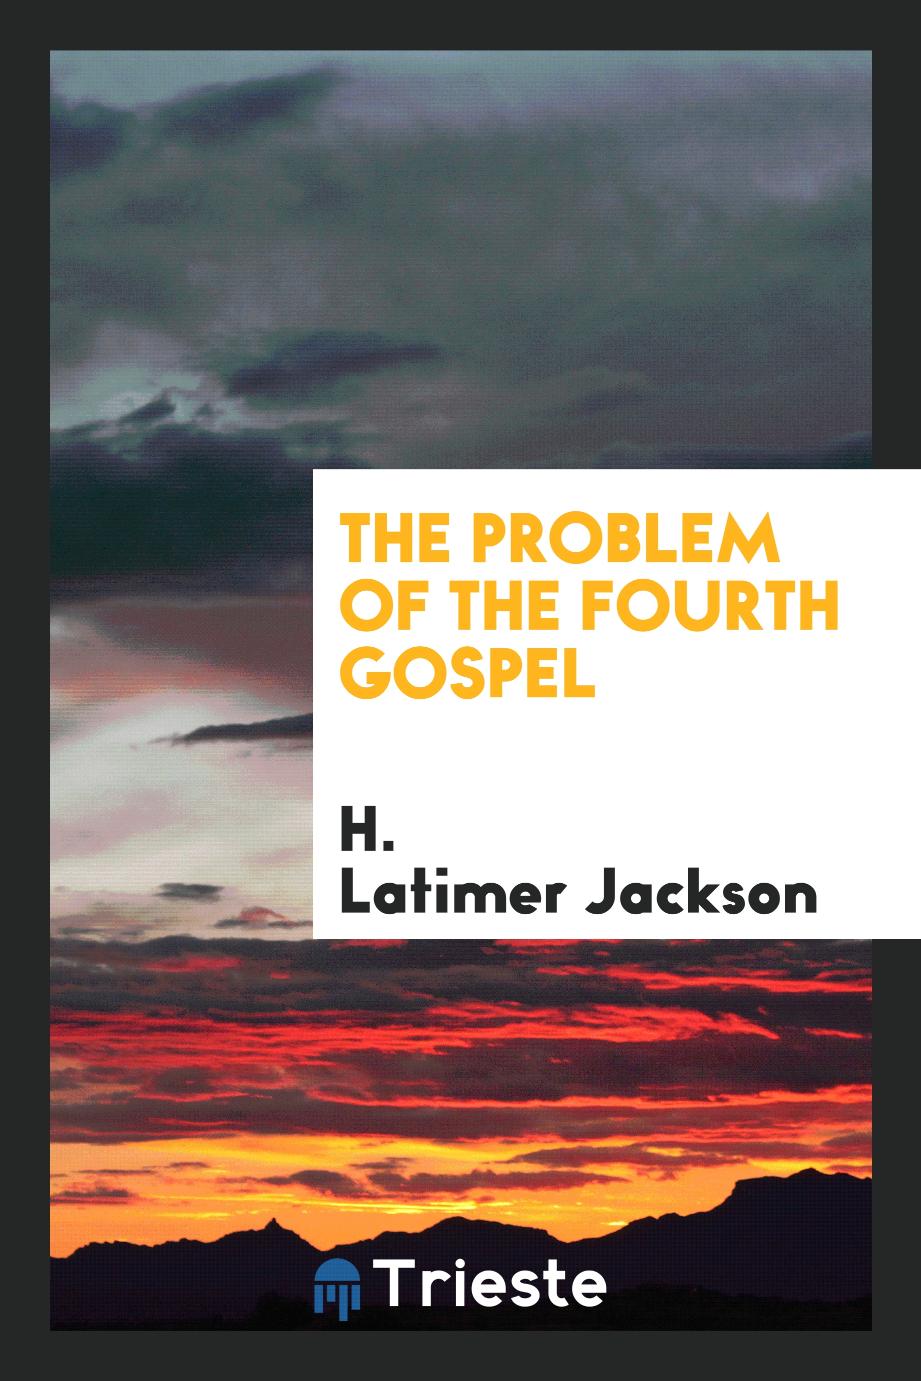 The problem of the Fourth gospel